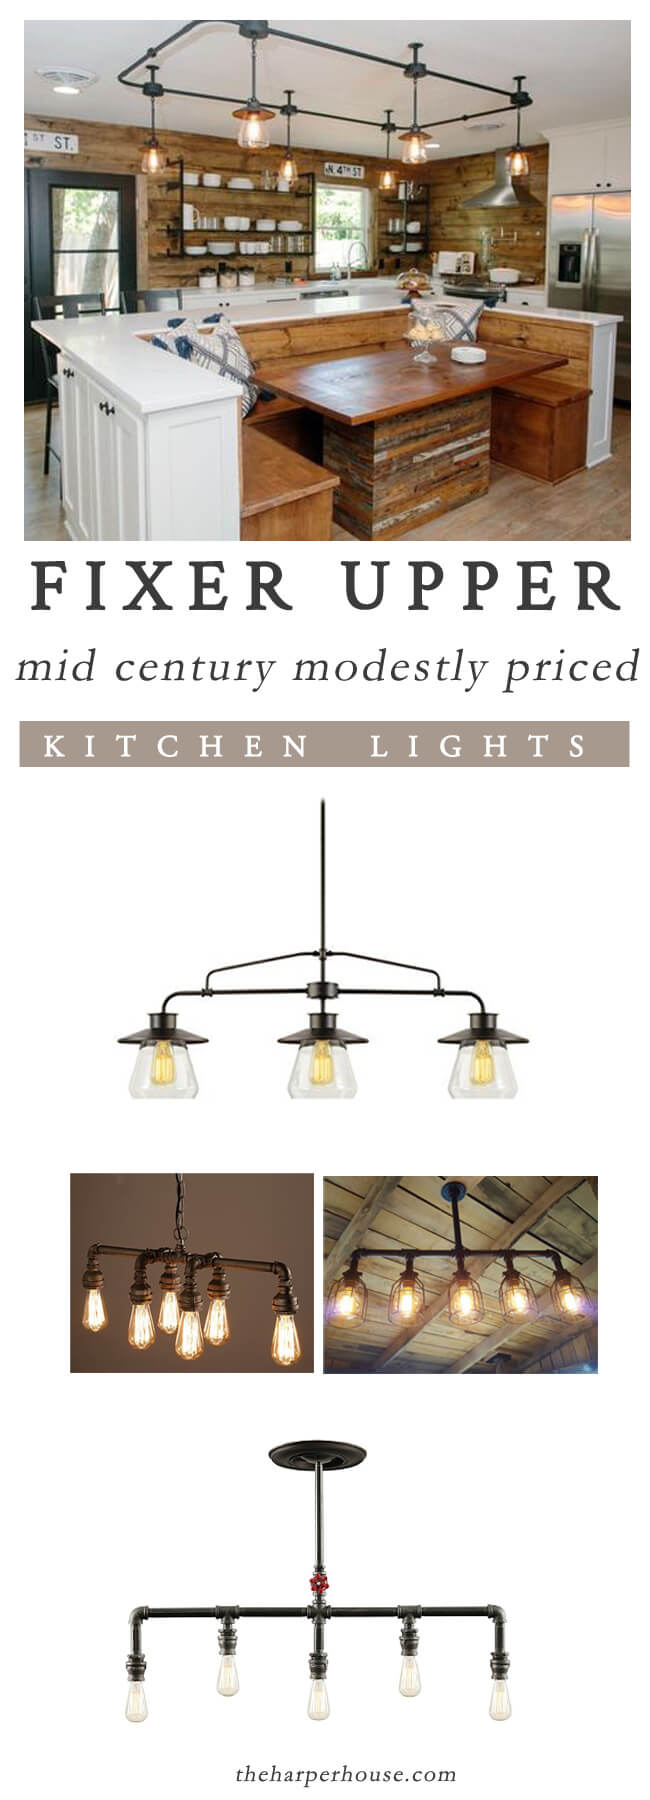 where to buy the kitchen lights featured on Fixer Upper: Season 4 episode 2 Mid Century Modestly Priced House